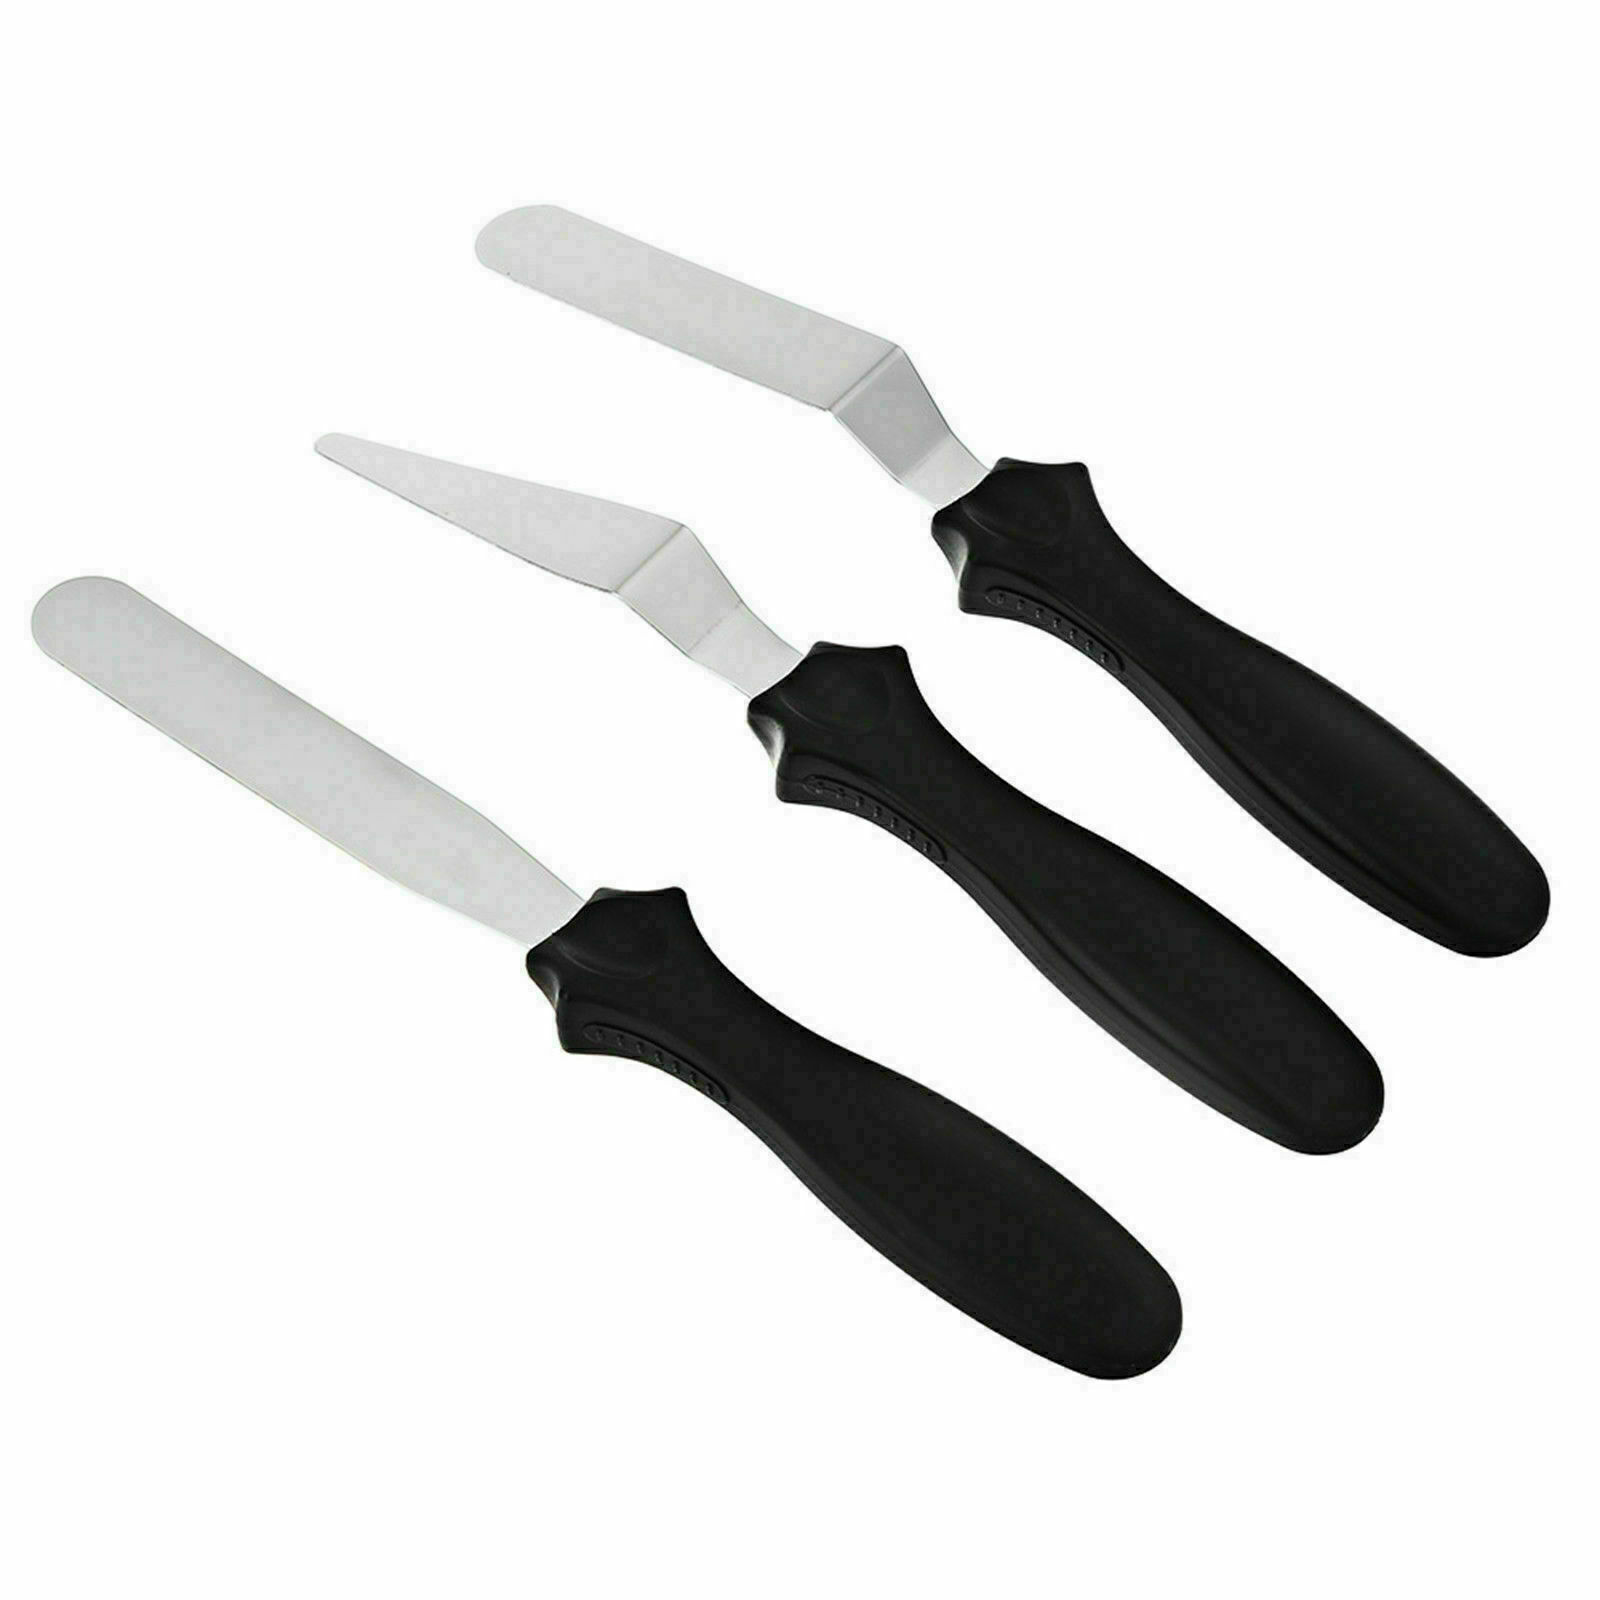 Pack of 3 Stainless Steel Spatula Palette Knife Cake Decorating Smooth Tools